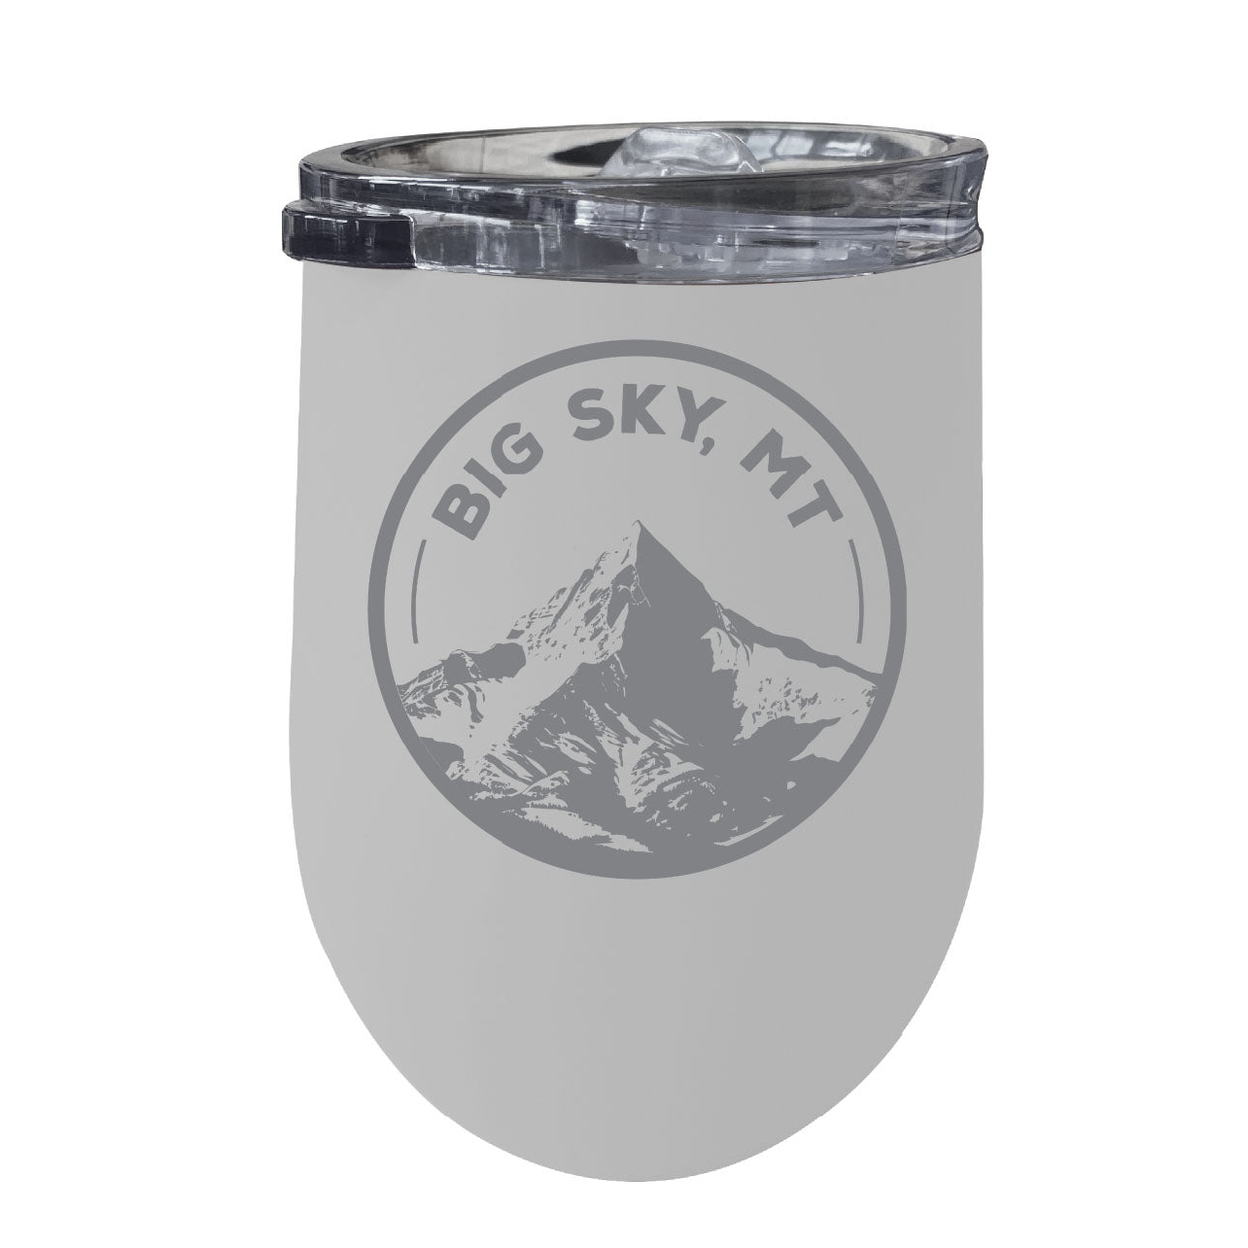 Big Sky Montana Souvenir 12 Oz Engraved Insulated Wine Stainless Steel Tumbler - White,,4-Pack